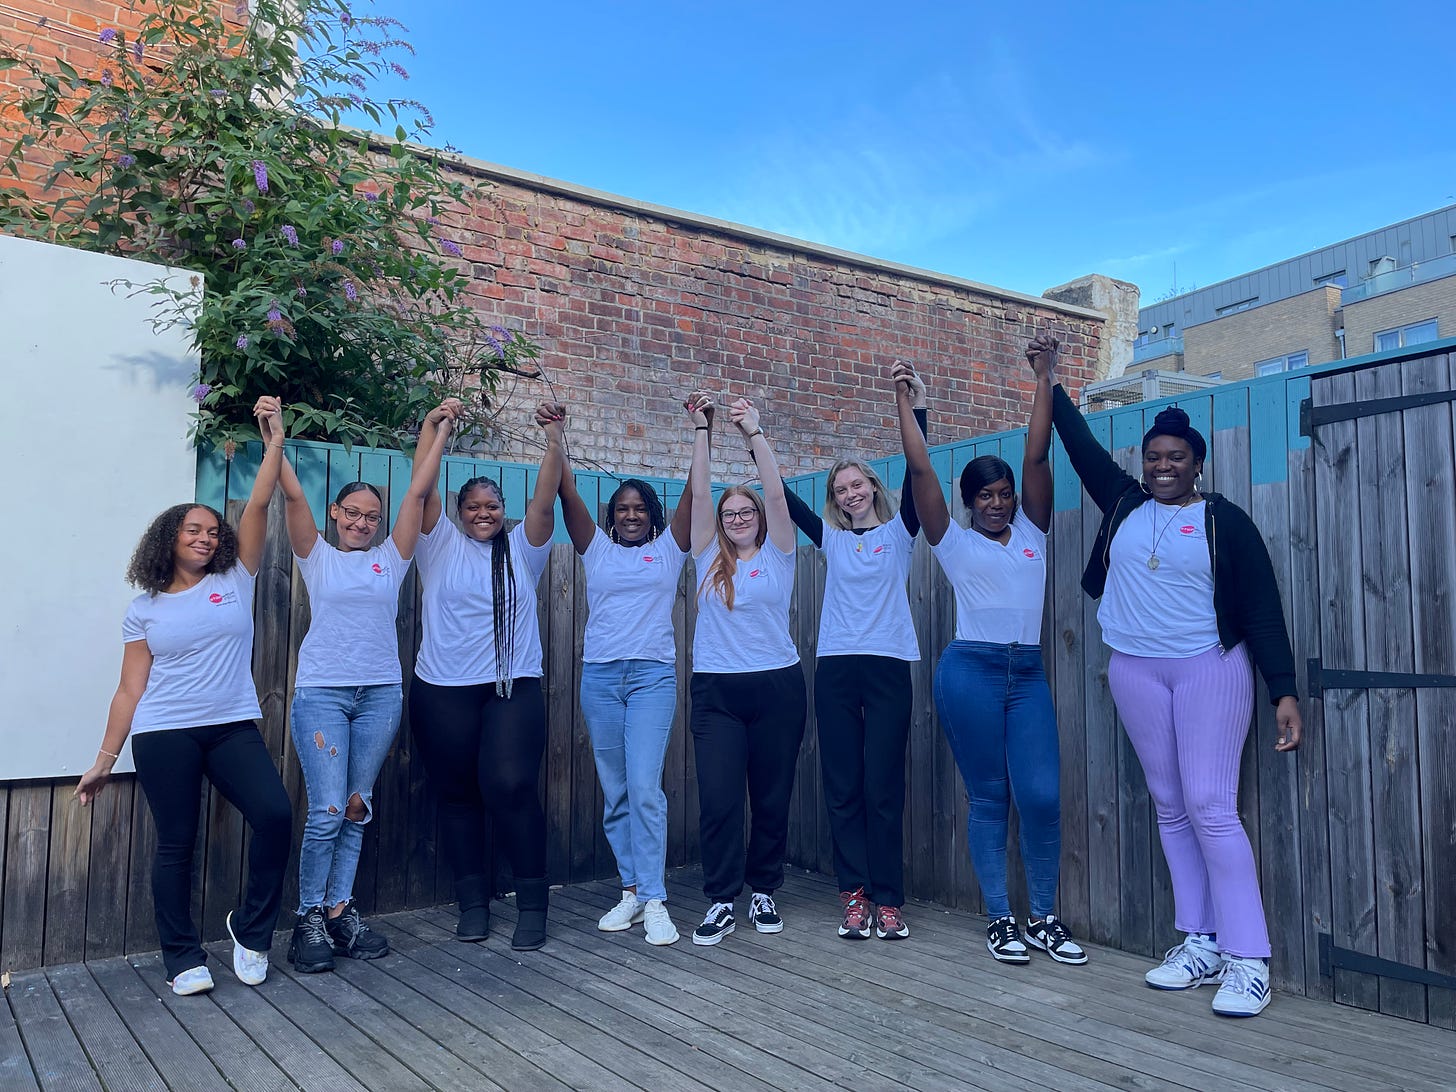 The London team standing outside, arms in the air and holding hands, wearing matching white t-shirts with the girls' project logo on them